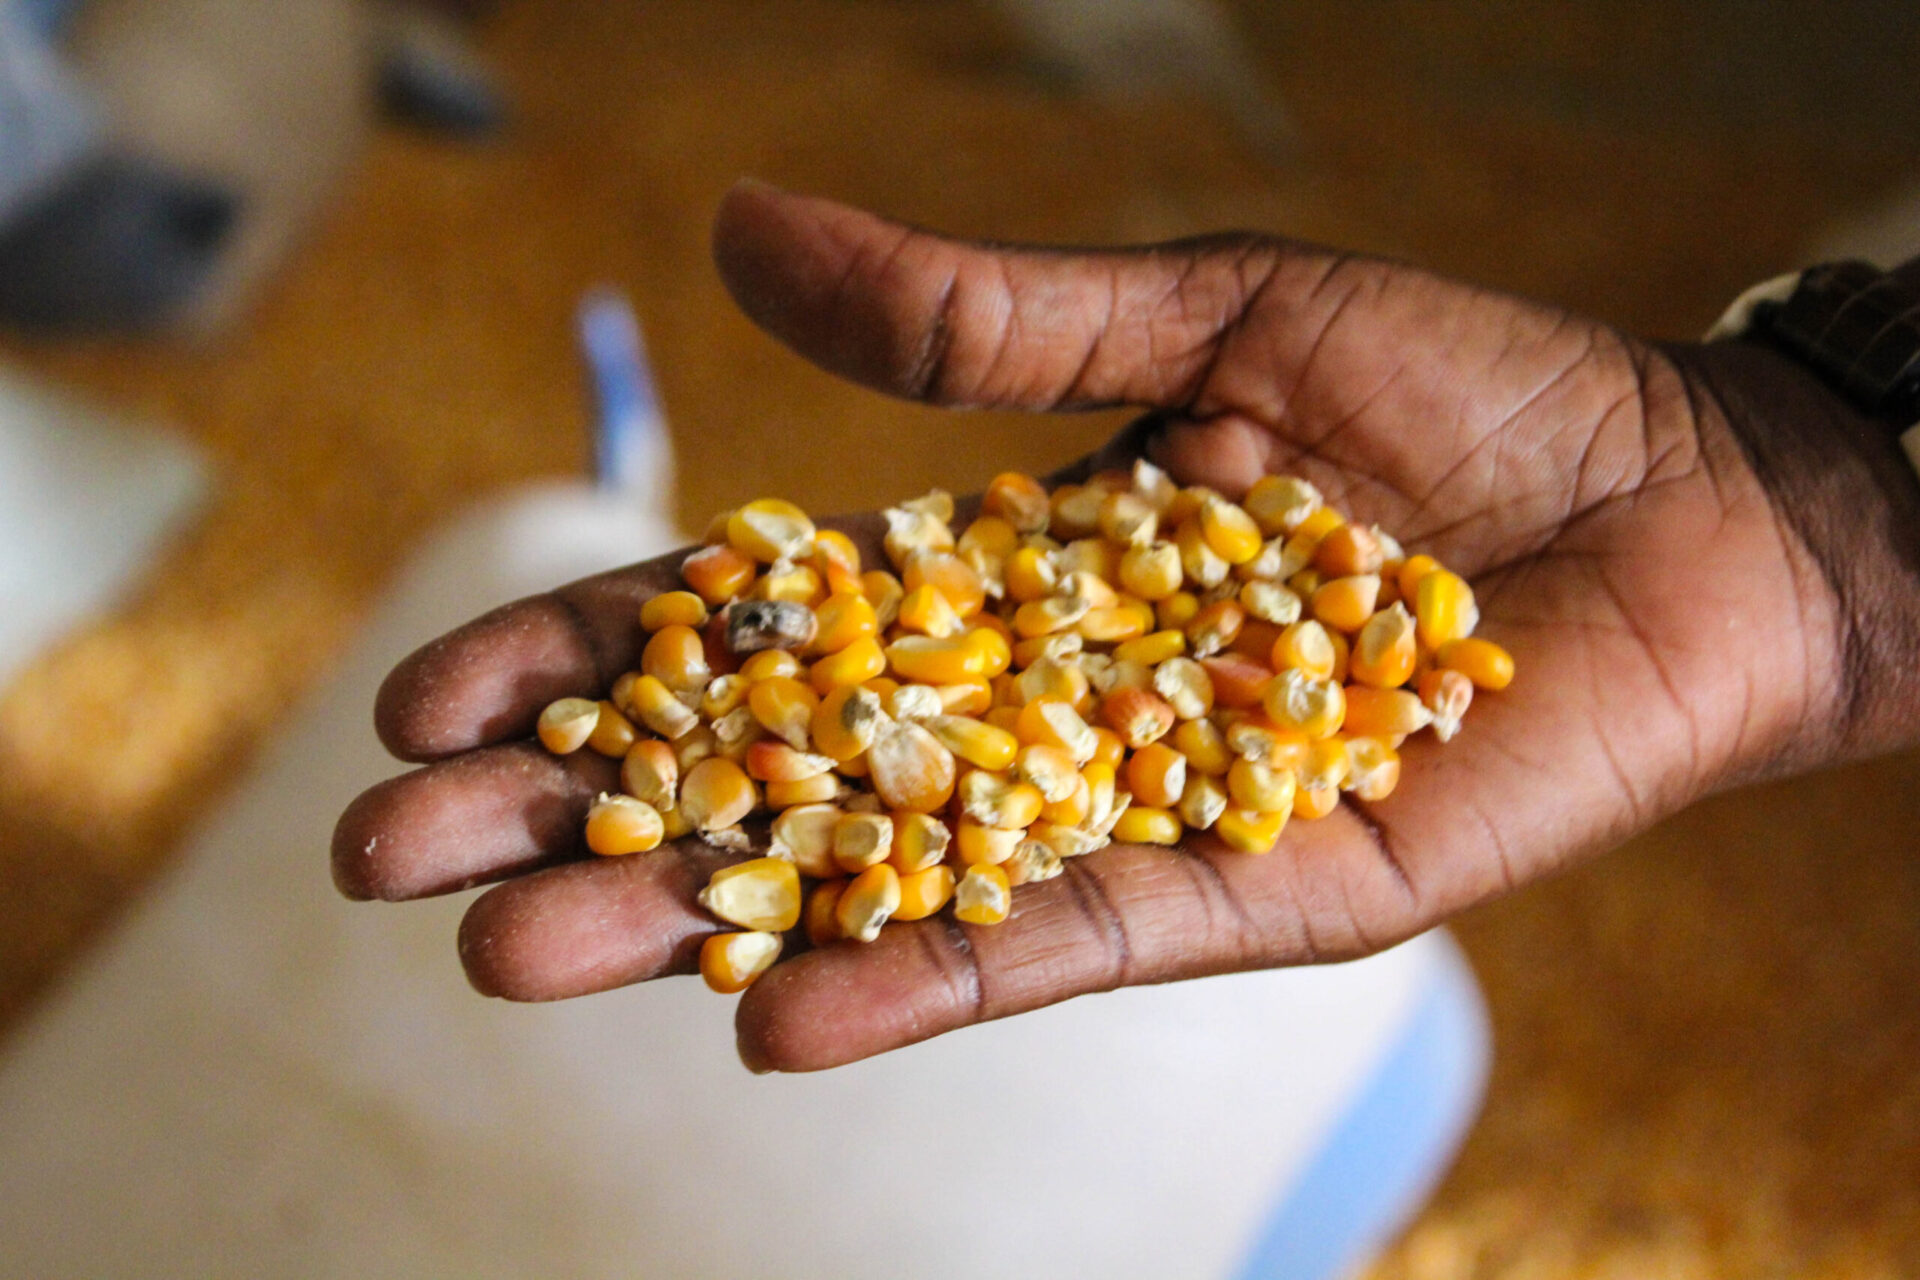 Adaptation measures for especially maize are urgently needed in Africa to curb future negative climate impacts.